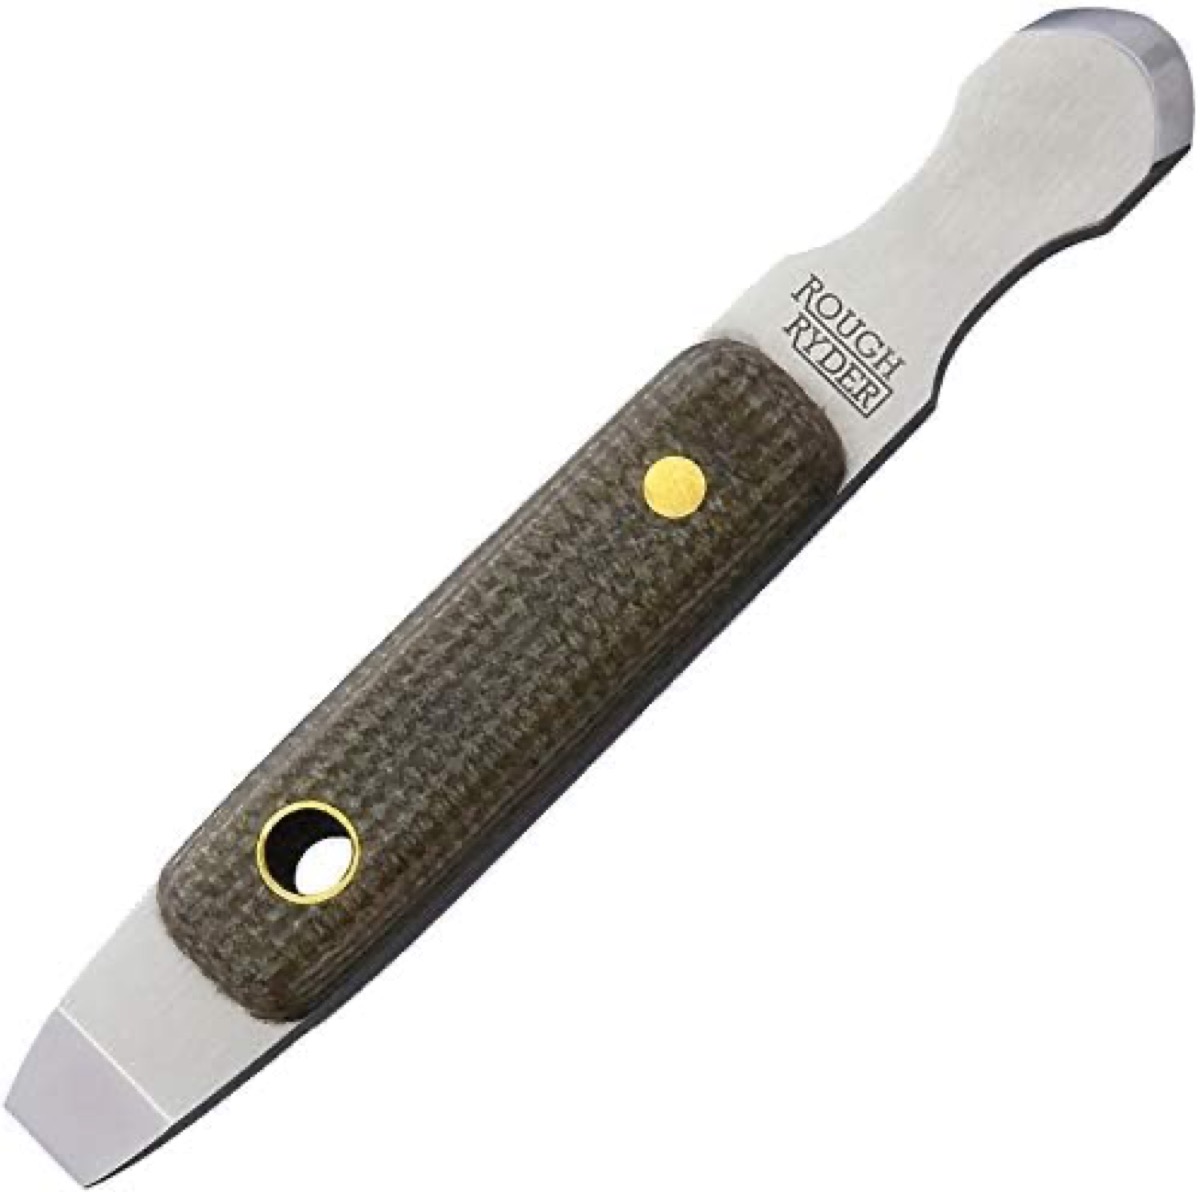 What the heck is this knife tool and why do some of you need it?